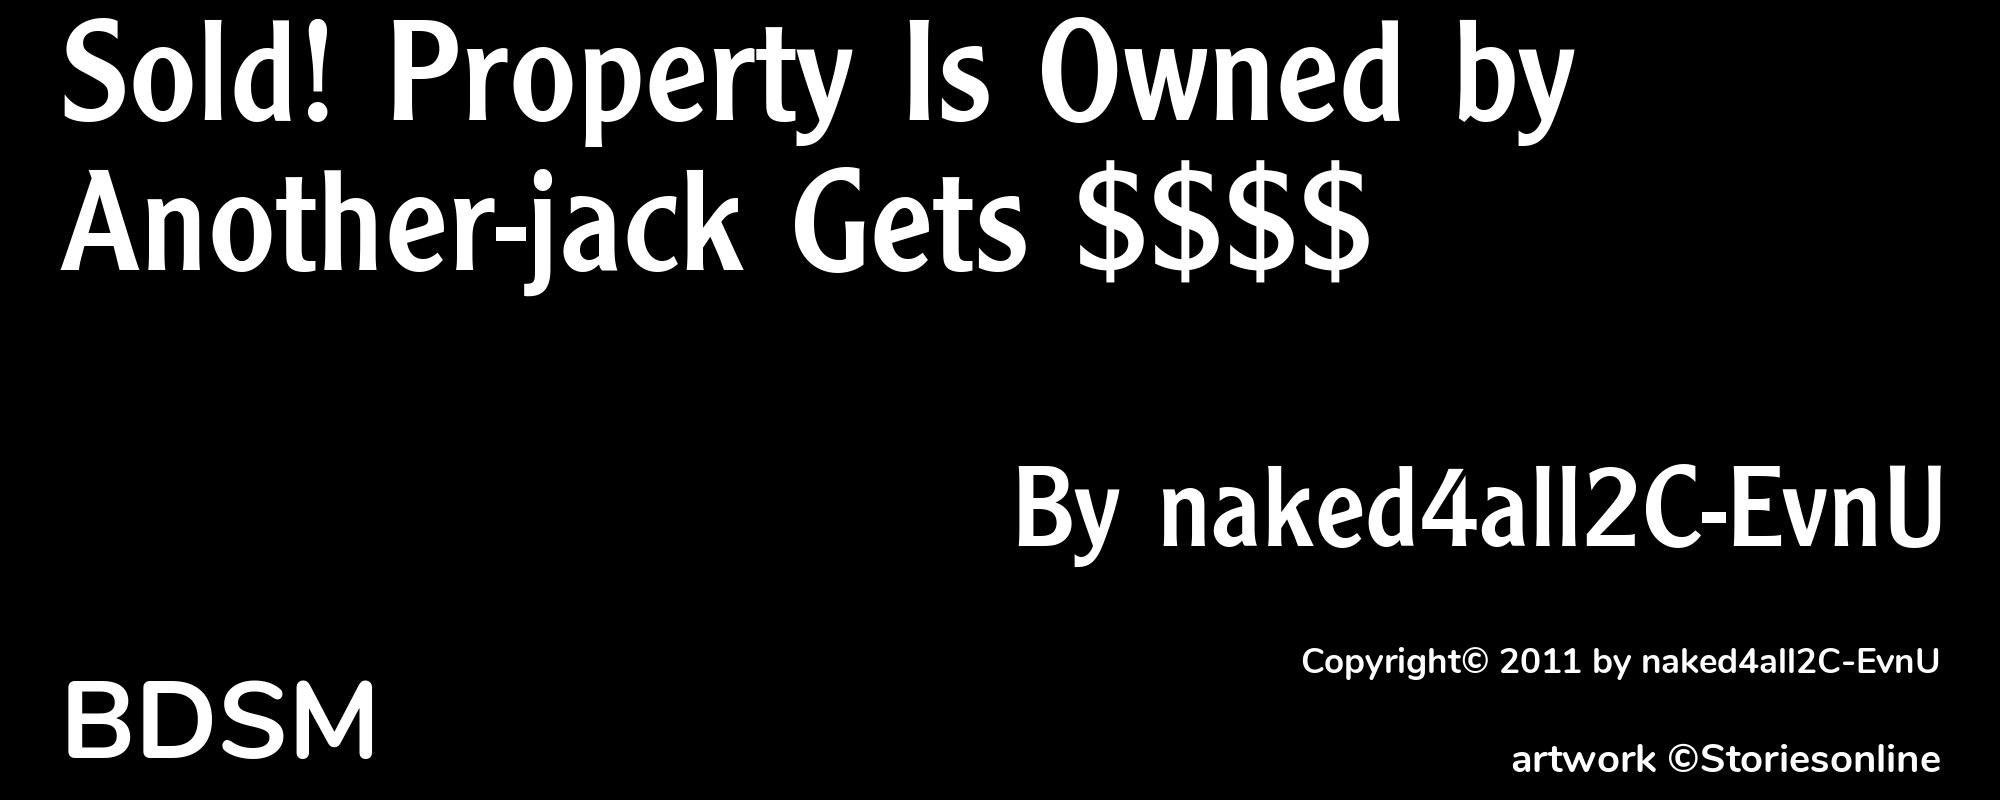 Sold! Property Is Owned by Another-jack Gets $$$$ - Cover